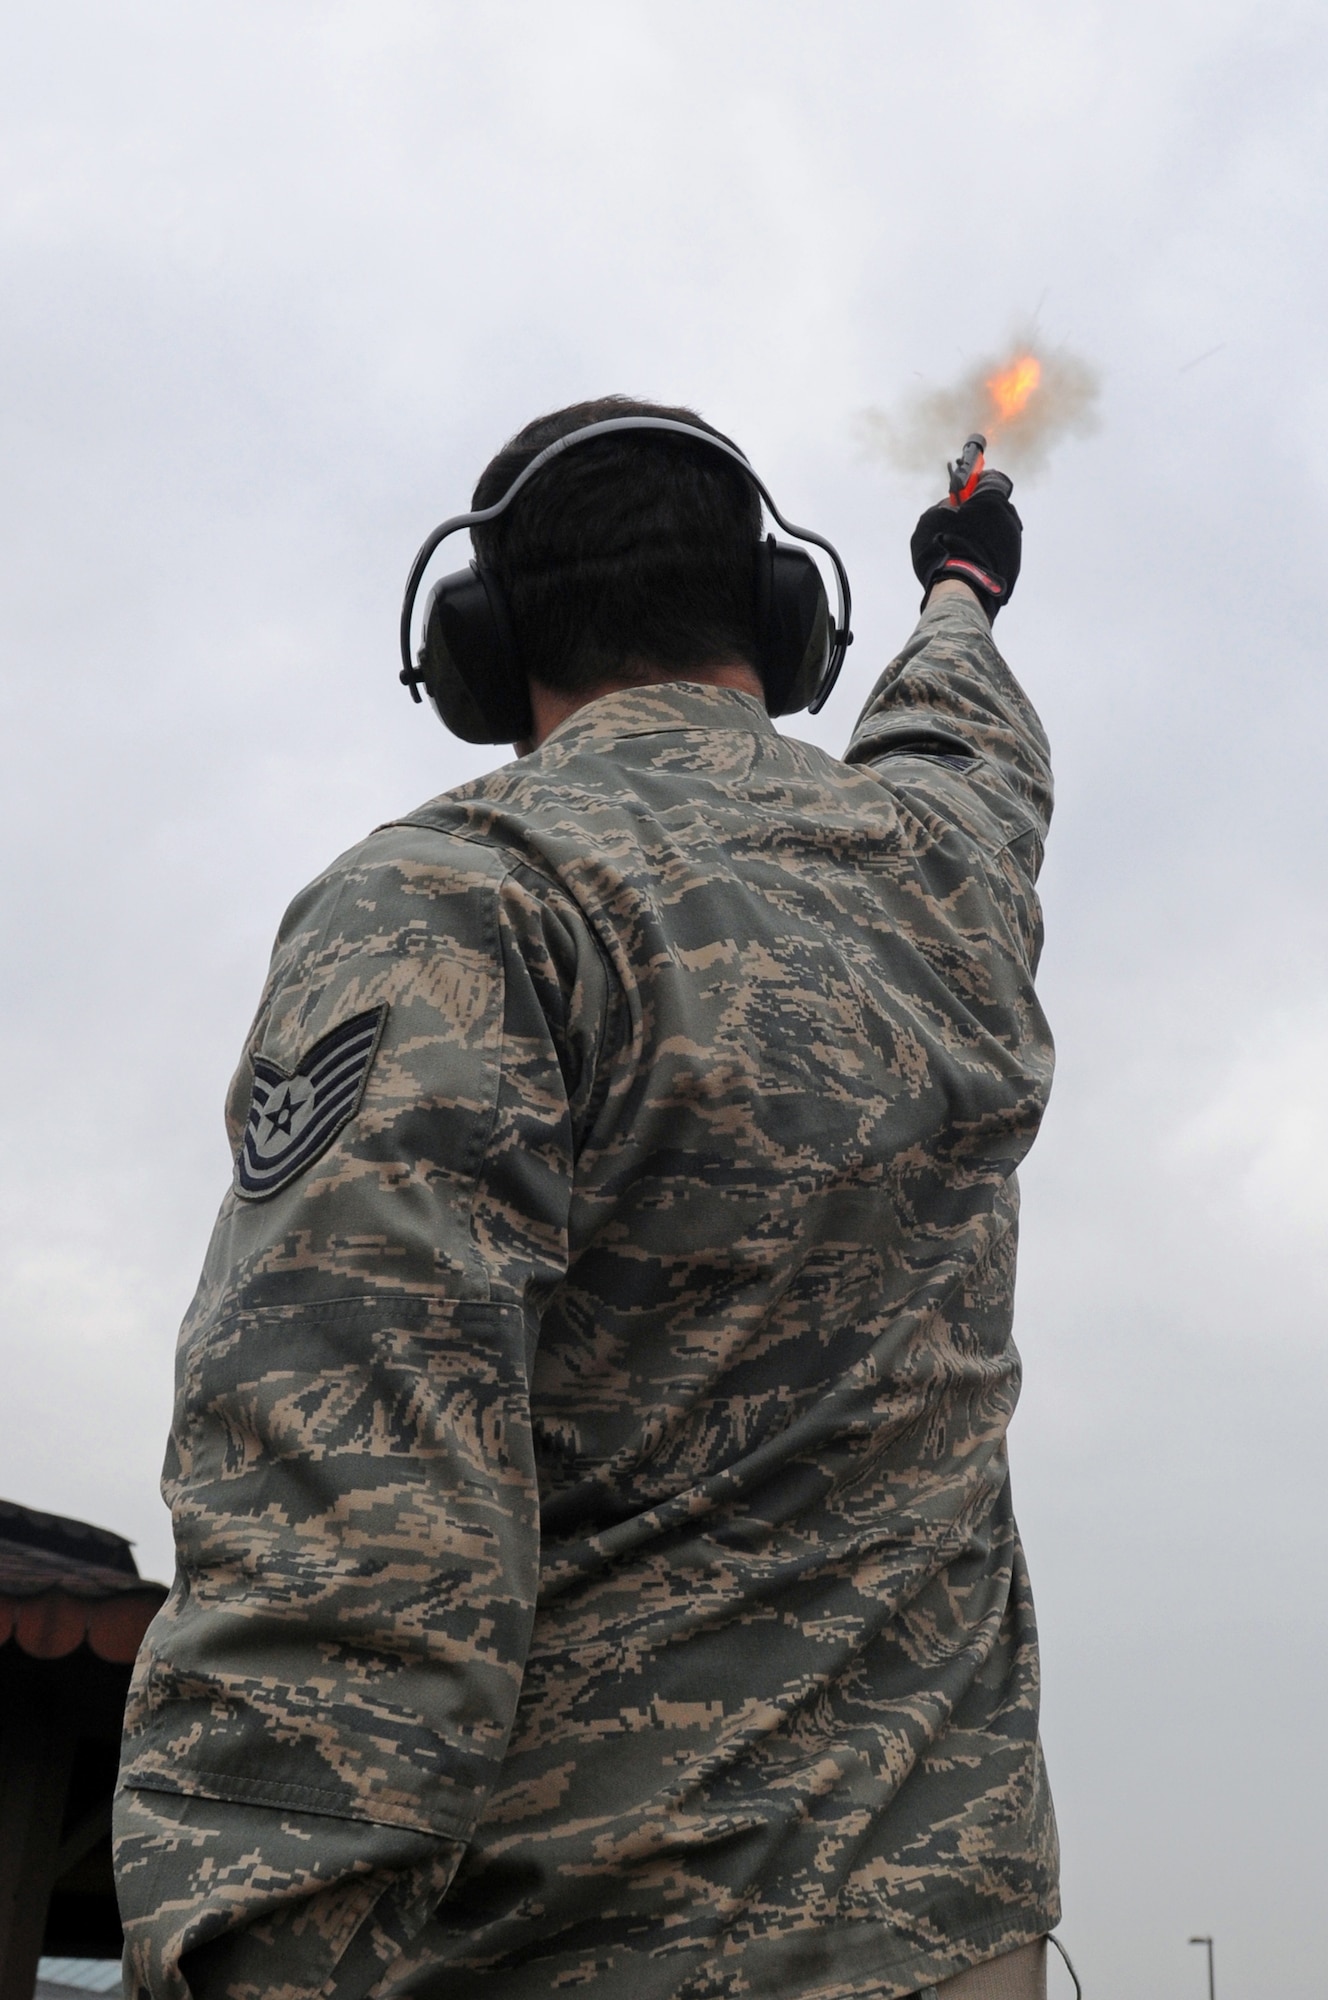 Tech. Sgt. Matthew Ludwig, 86th Operation Support Squadron Airfield Management non-commissioned officer in charge of training, fires a scare-away launcher during a Bird Aircraft Strike Hazard exercise Feb. 4, 2009, at Ramstein Air Base. The launcher is one method used to scare away any birds interfering with inbound or outbound flights. (U.S. Air Force photo by Airman 1st Class Grovert Fuentes-Contreras)